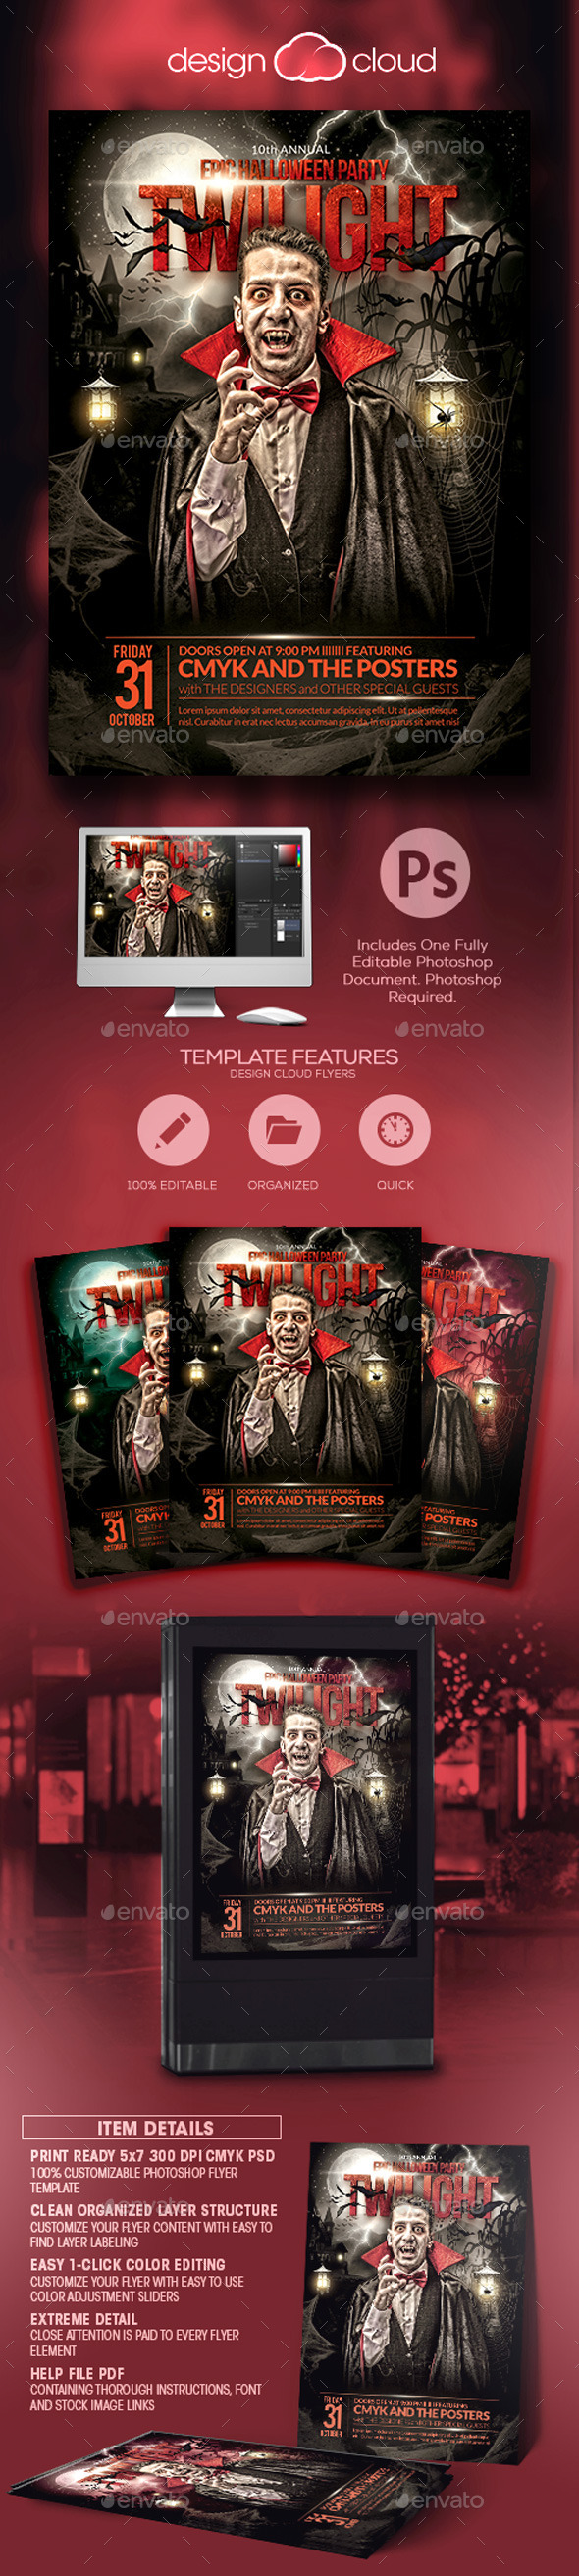 The Epic Twilight Halloween Party Flyer Template